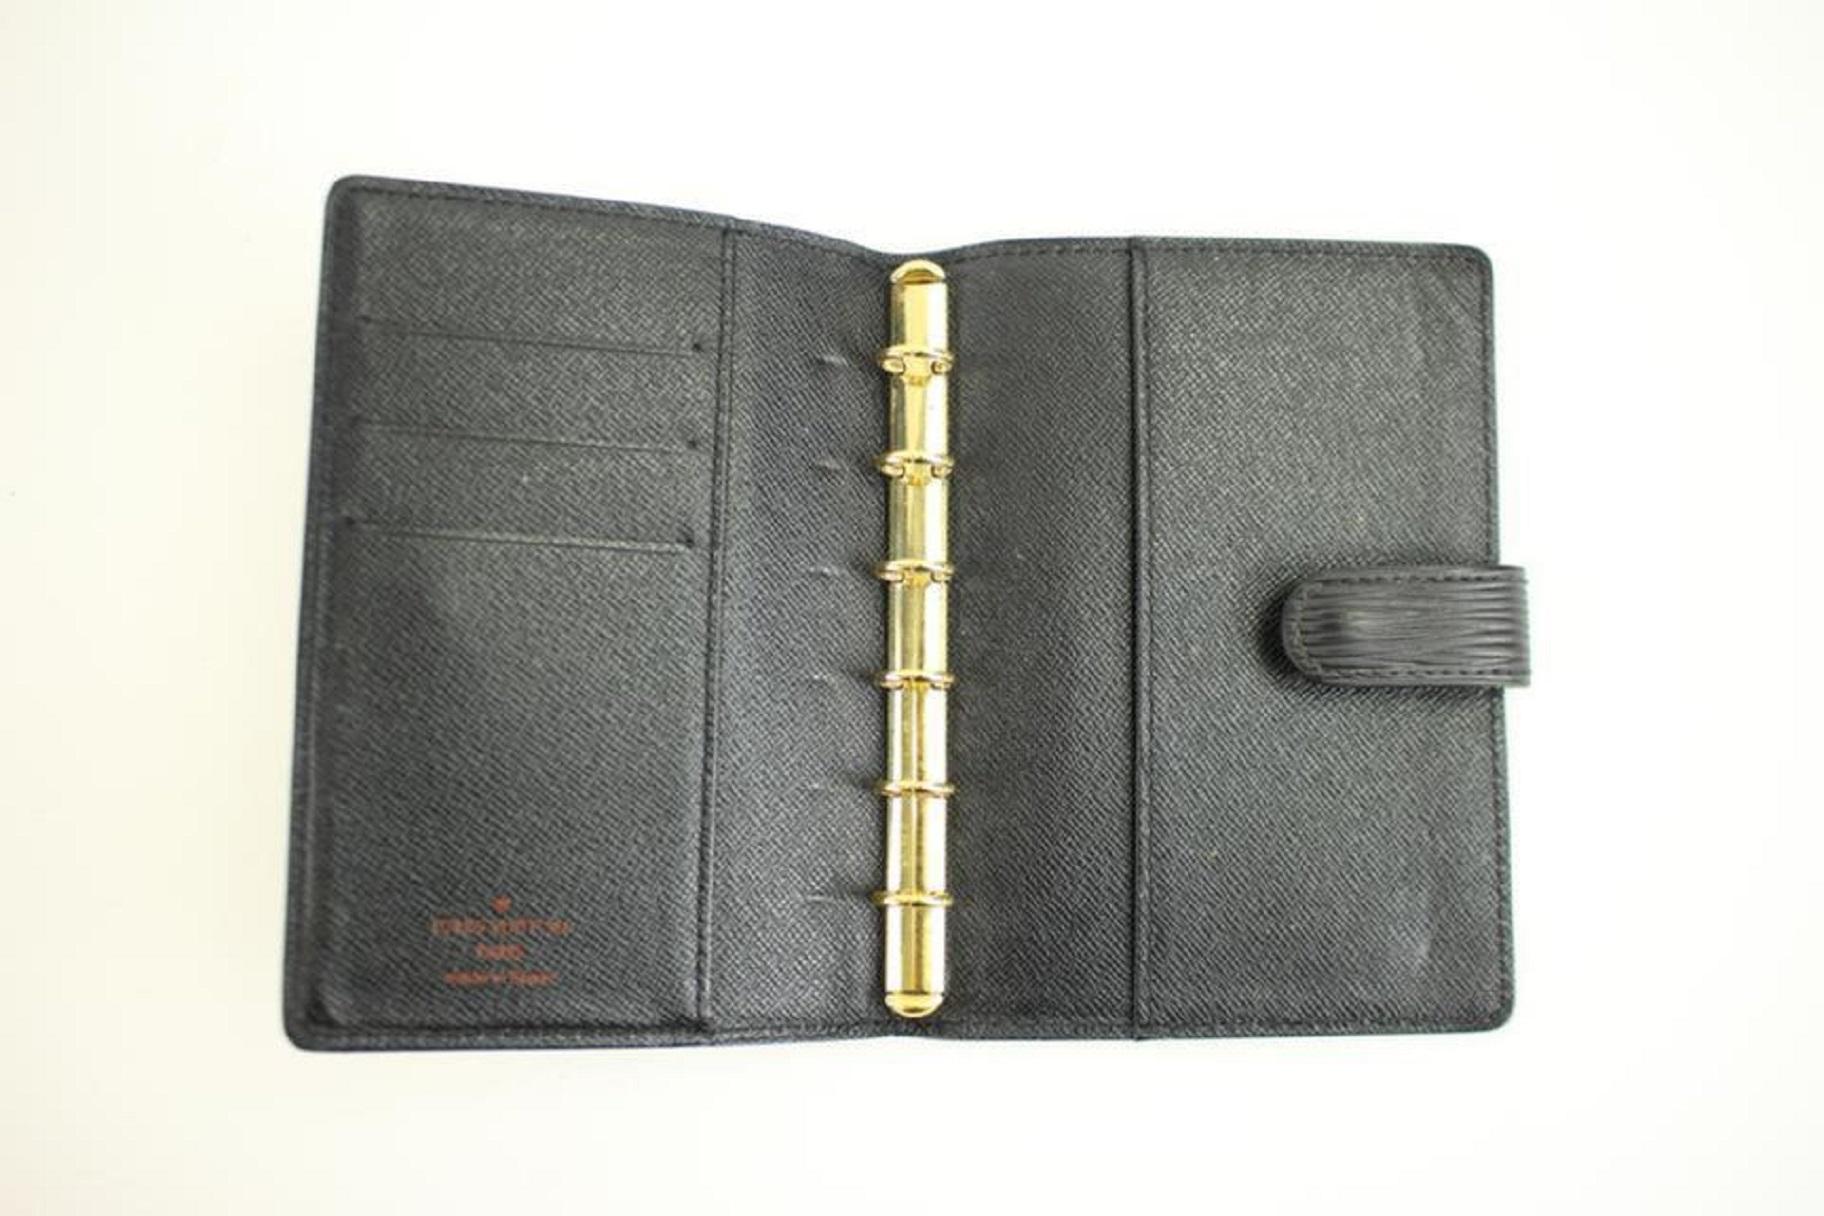 Louis Vuitton Black Epi Leather Small Ring Agenda PM Notebook Cover 86038 In Good Condition For Sale In Dix hills, NY